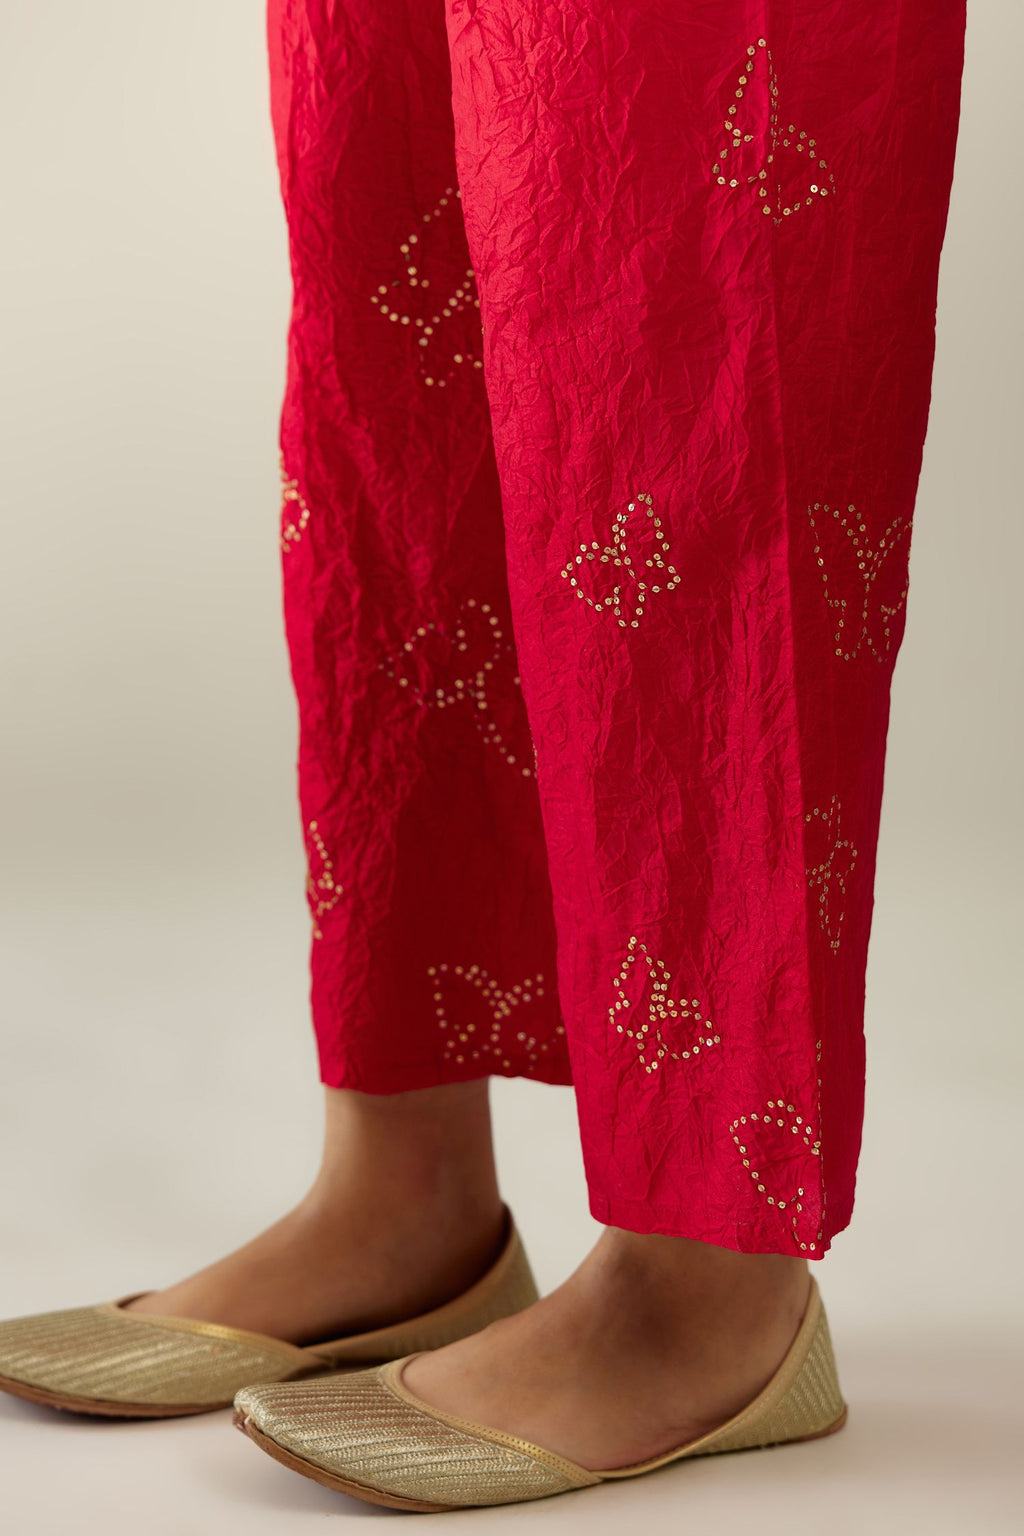 Red silk pants with side pockets and assorted sequined butterflies till mid-calf length.